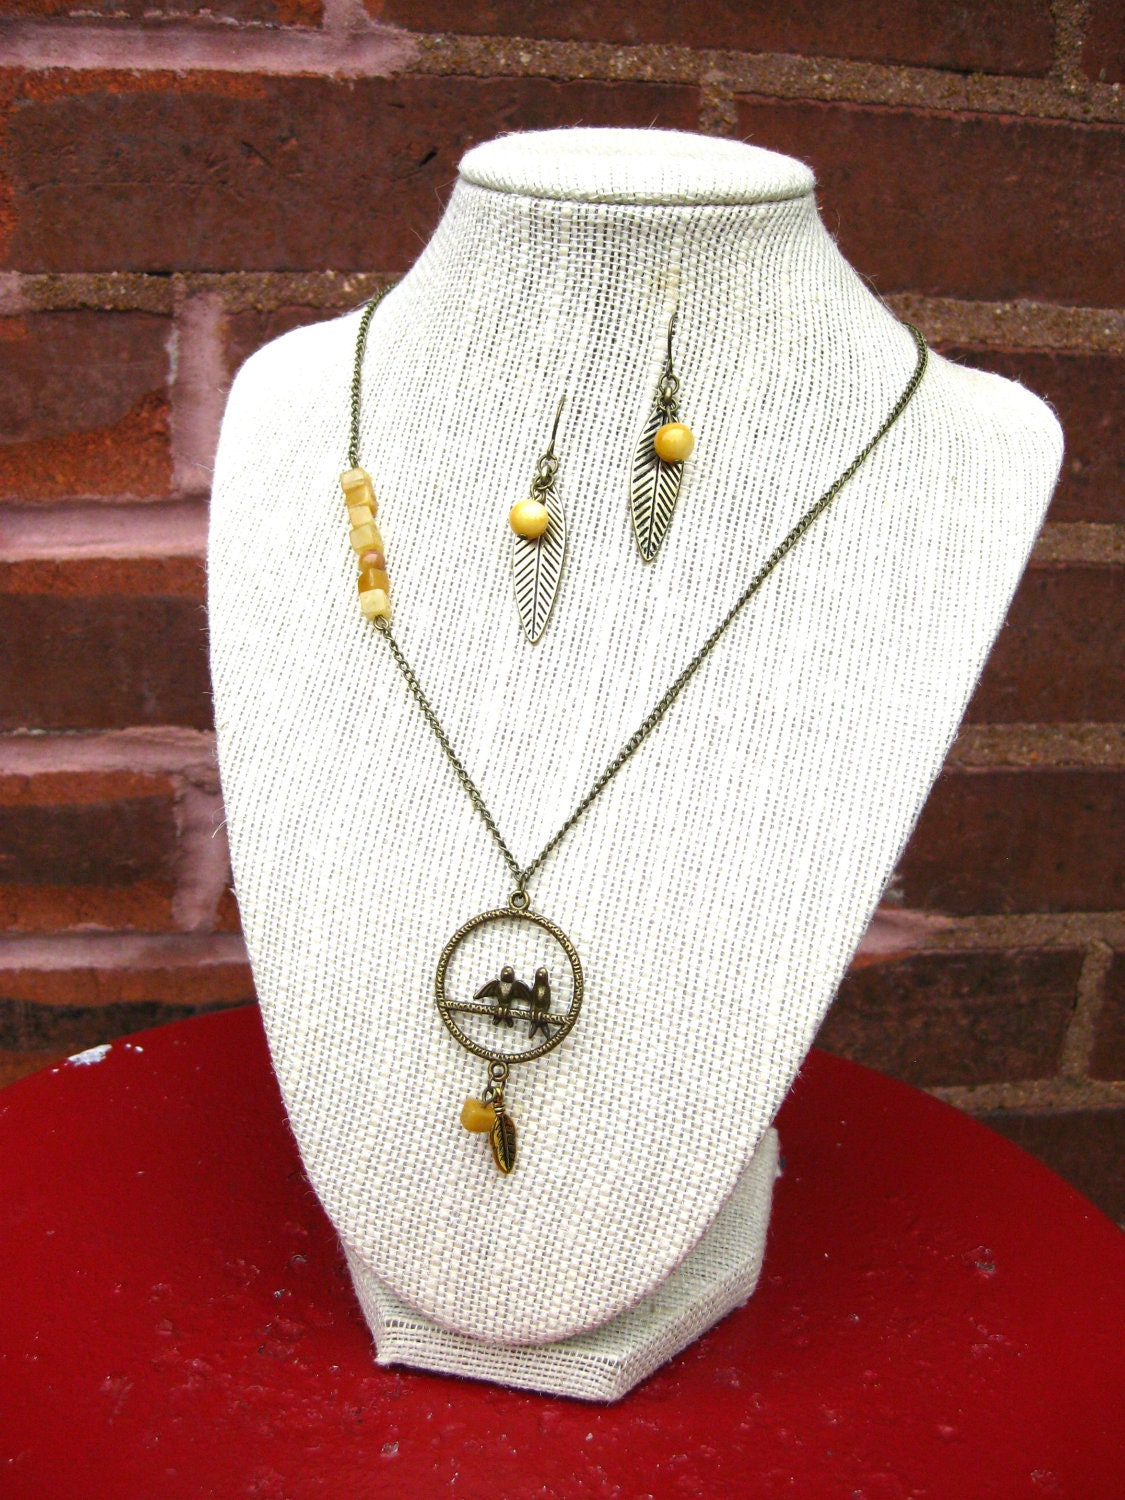 Bird Necklace and Earrings, Jewelry Set, Gift Set, Yellow Stone Beads